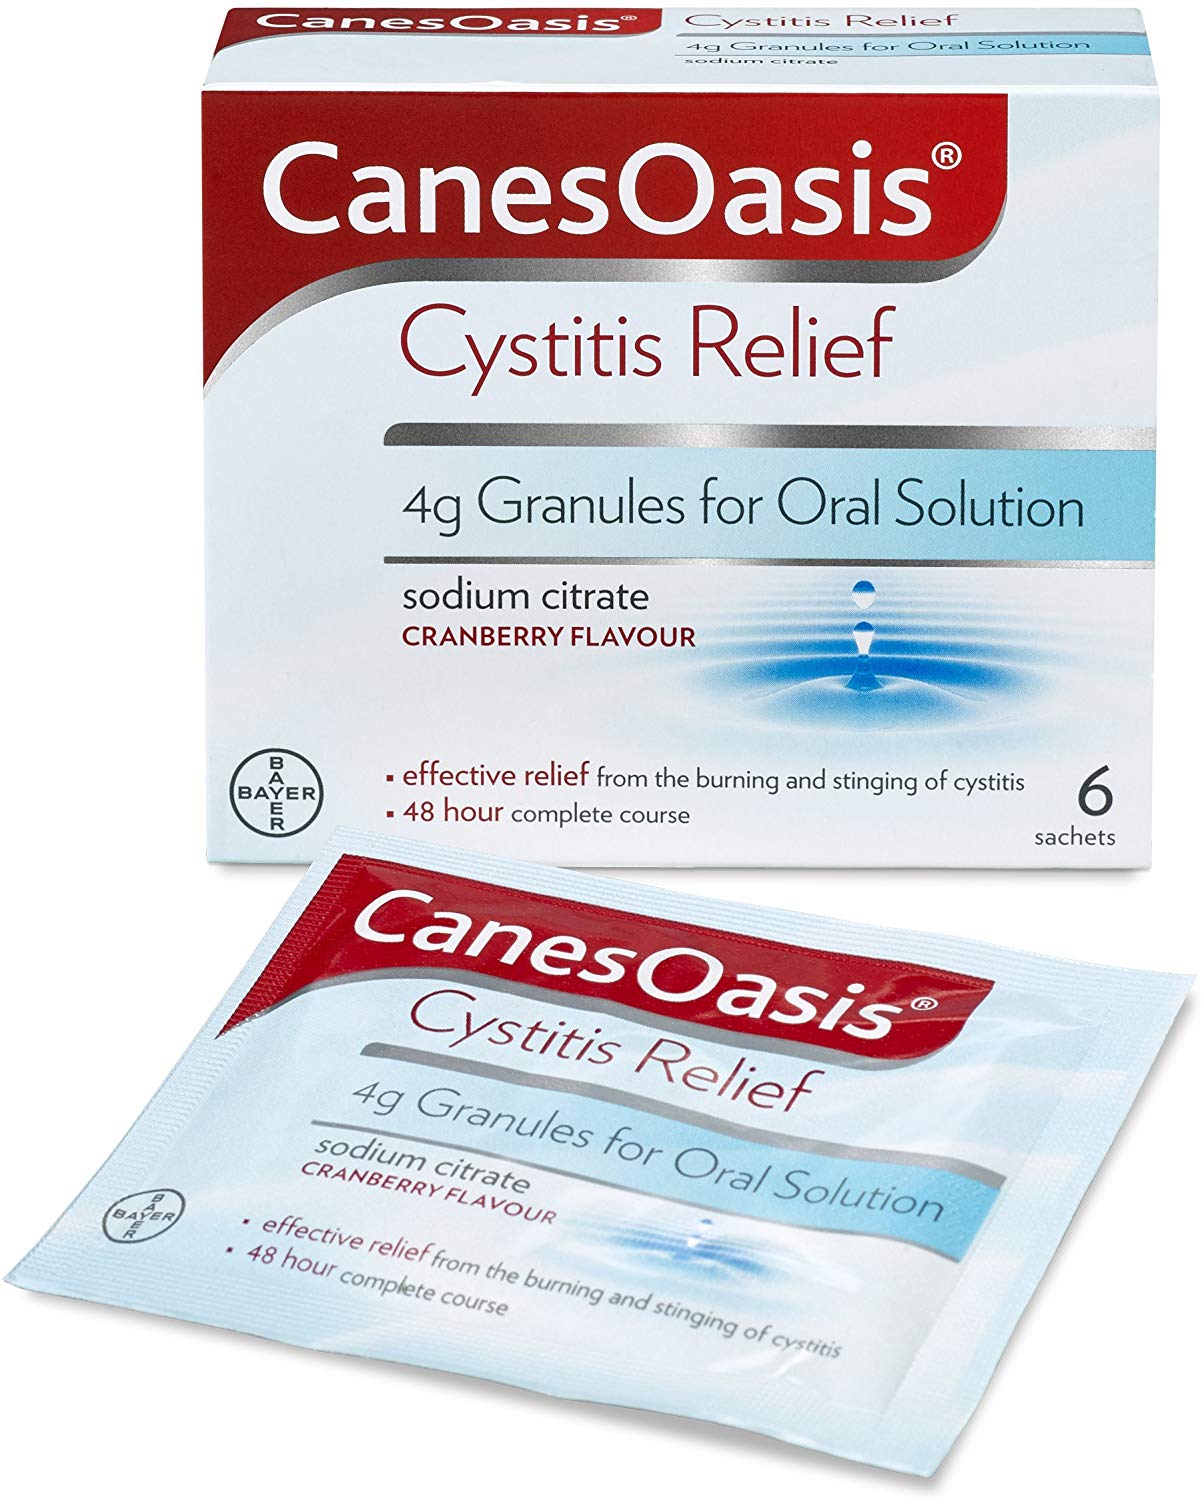 CANESOASIS cystitis relief